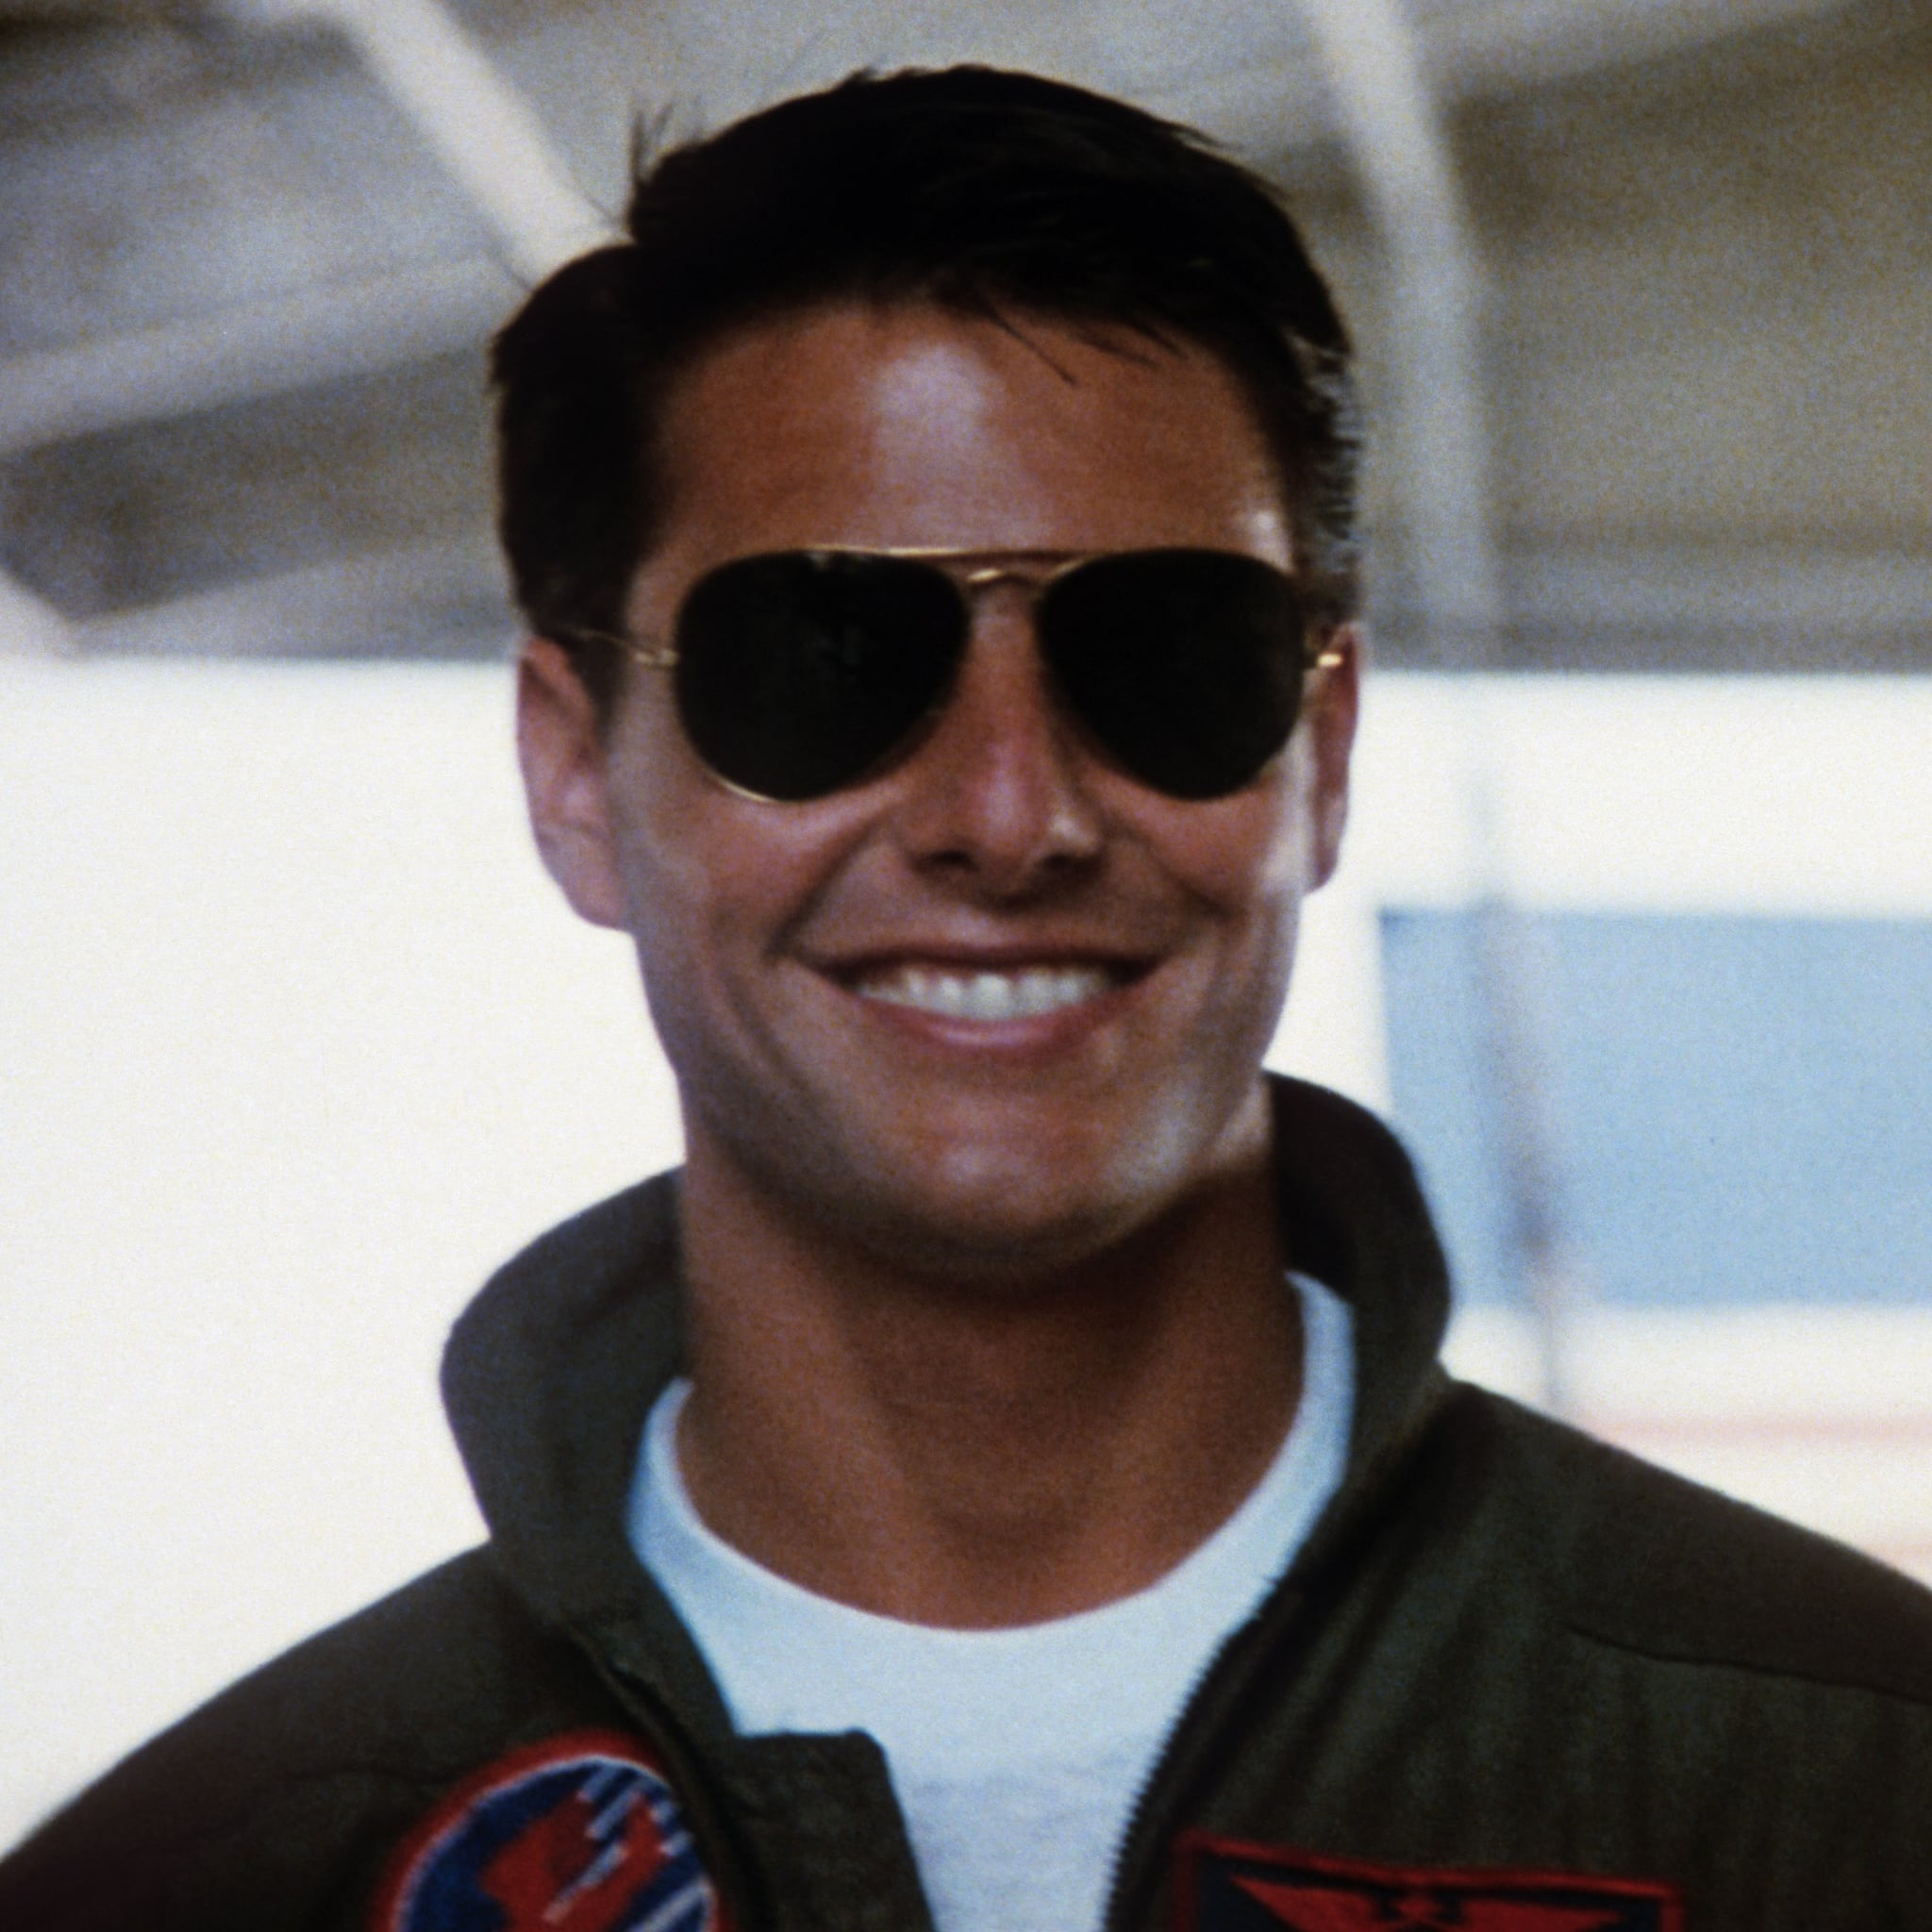 Tom Cruise Top Gun Sunglasses Images And Photos Finder | Free Hot Nude ...